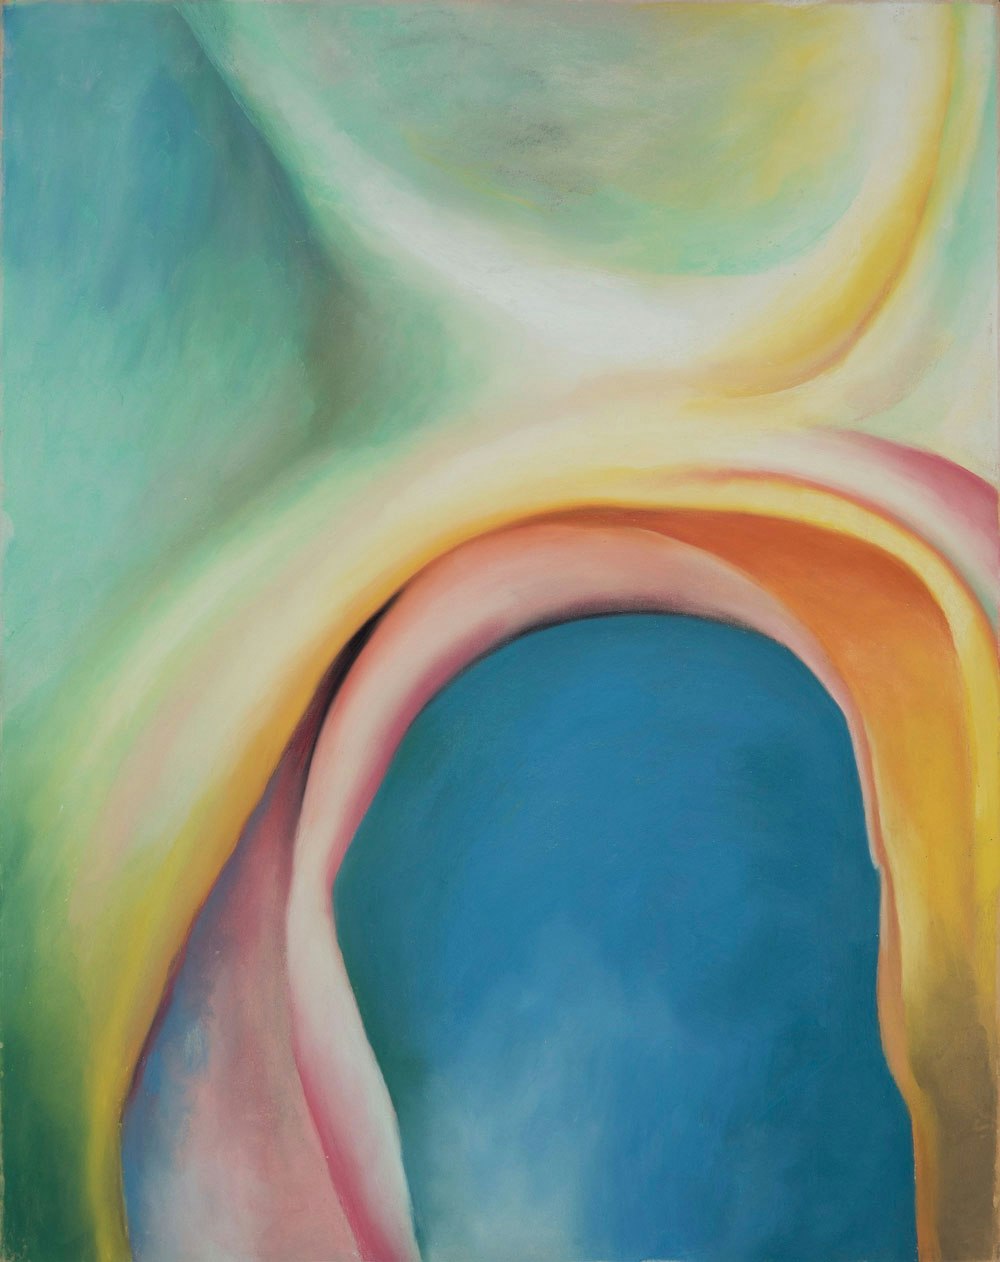 Georgia O’Keeffe, <em>Over Blue</em>, 1918. Pastel on paper, 28 × 22 inches. Memorial Art Gallery of the University of Rochester. Bequest of Anne G. Whitman. © 2023 Georgia O’Keeffe Museum / Artists Rights Society (ARS), New York.